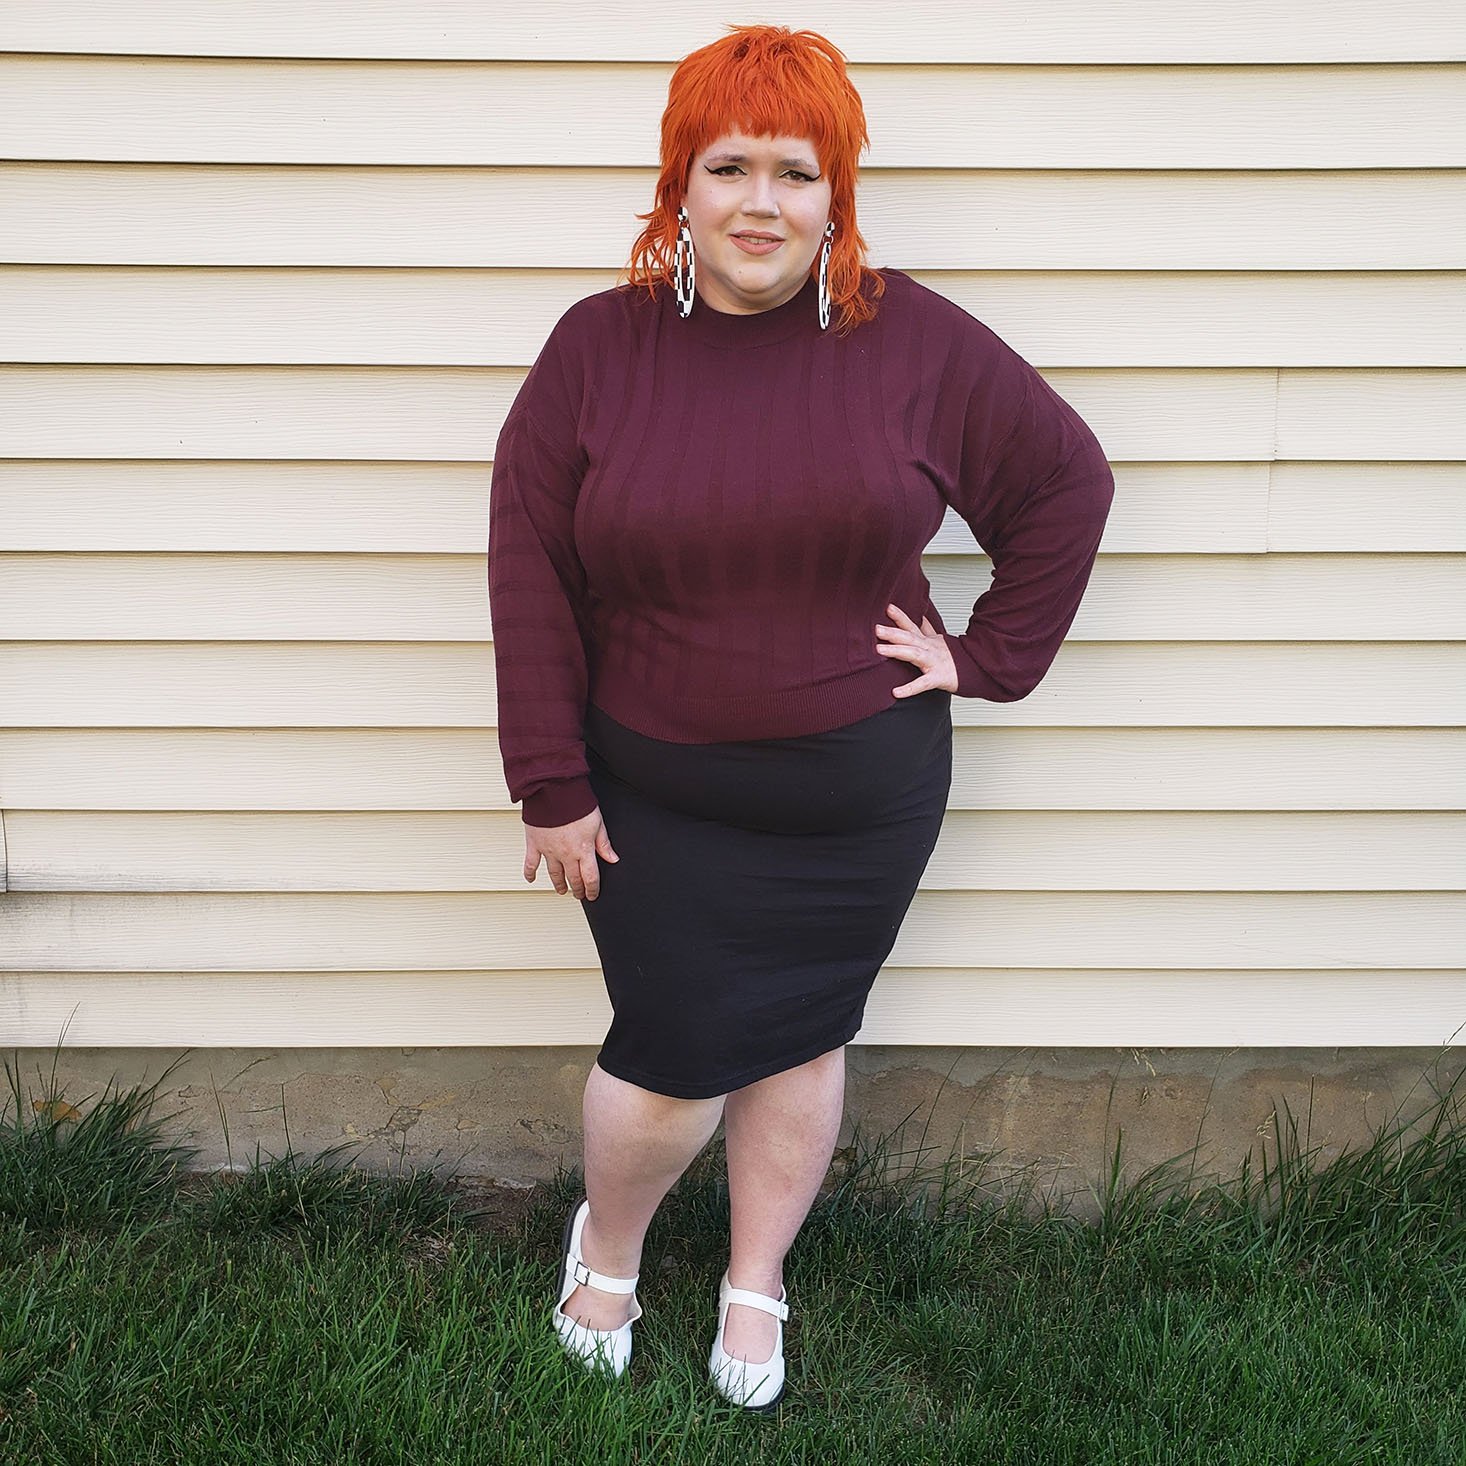 Gwynnie Bee Plus Size Clothing Review + Coupon – August 2021